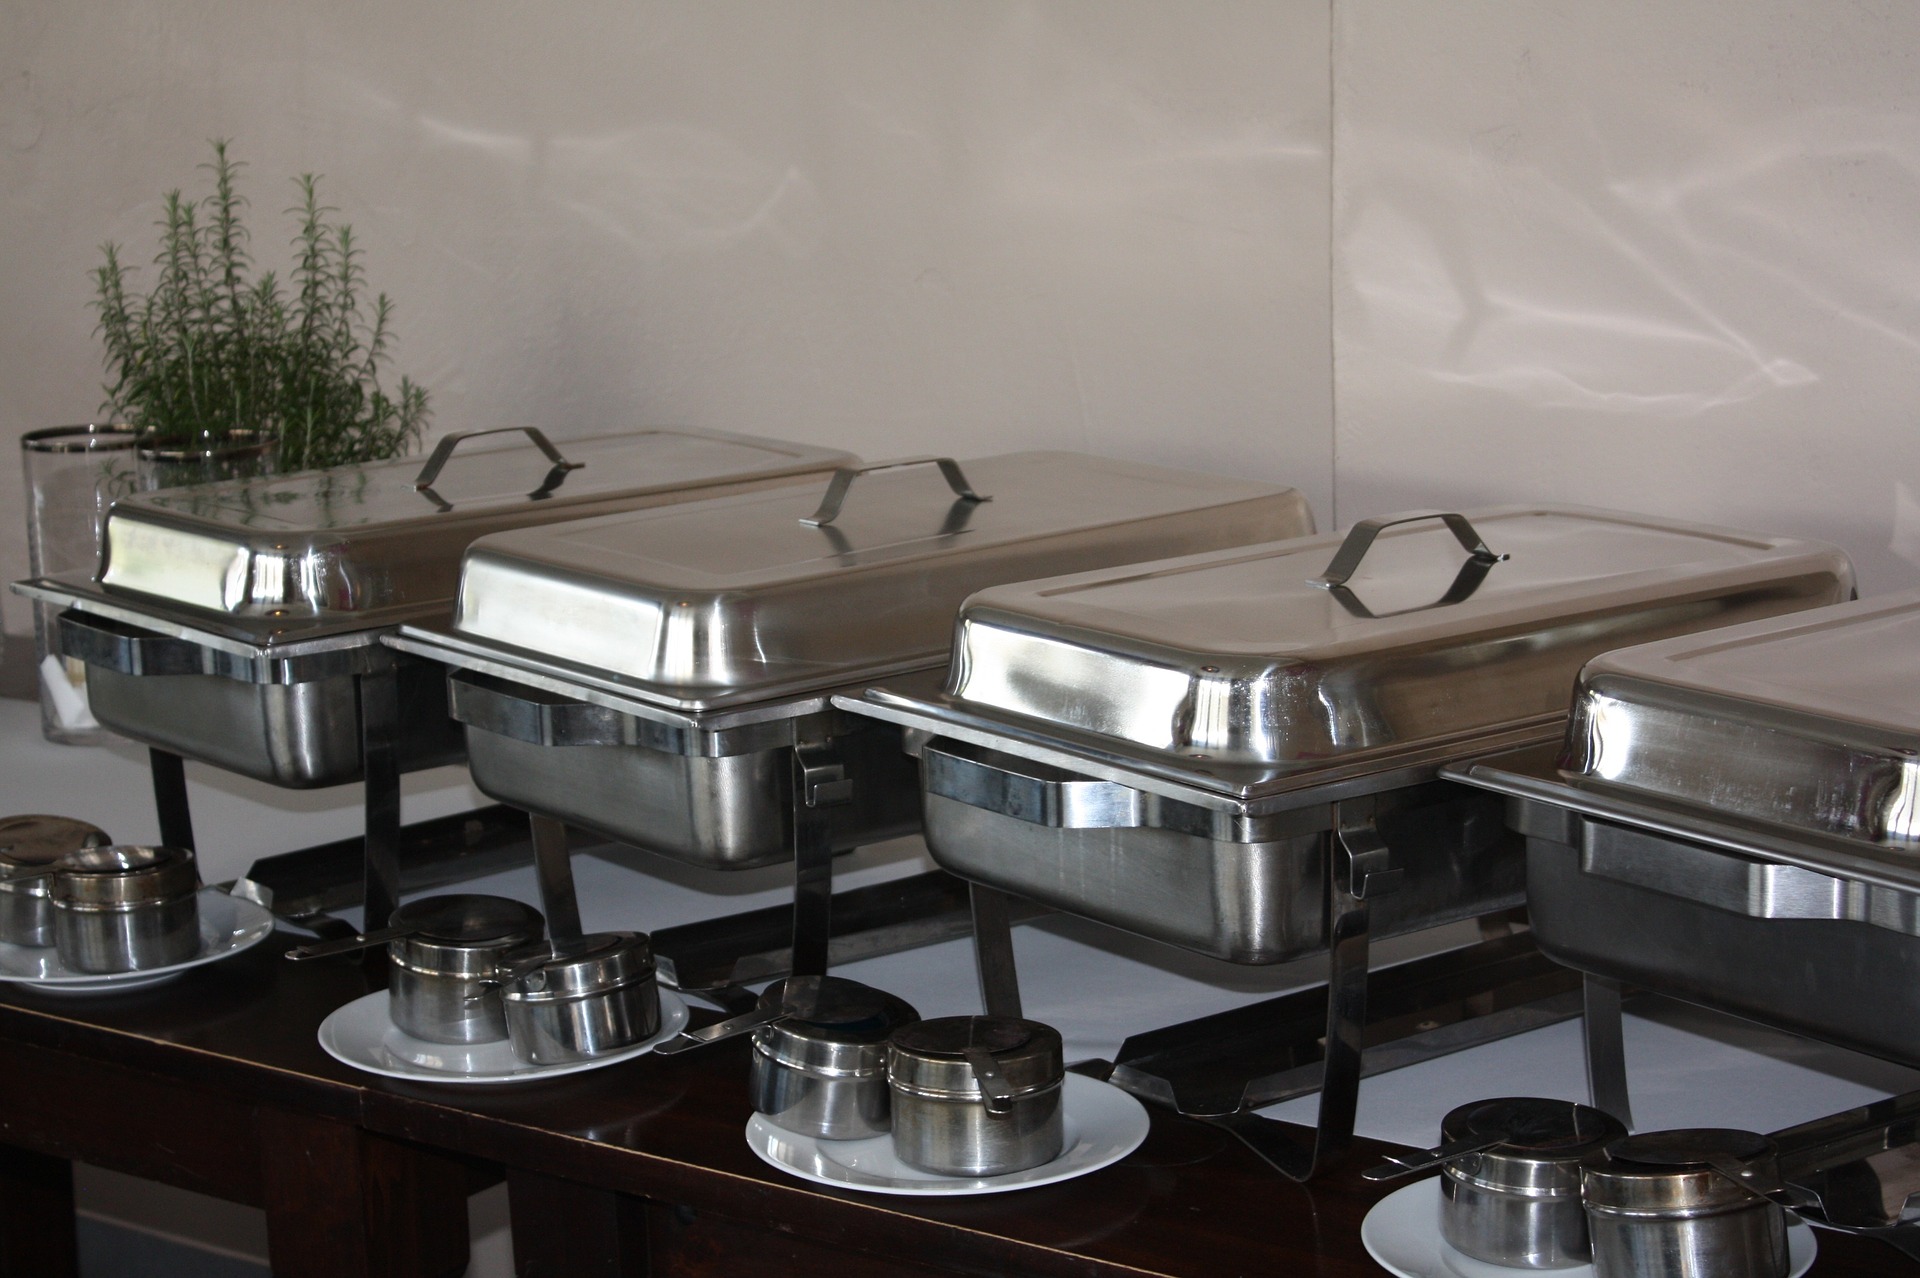 Full Service Caterers - Dishes